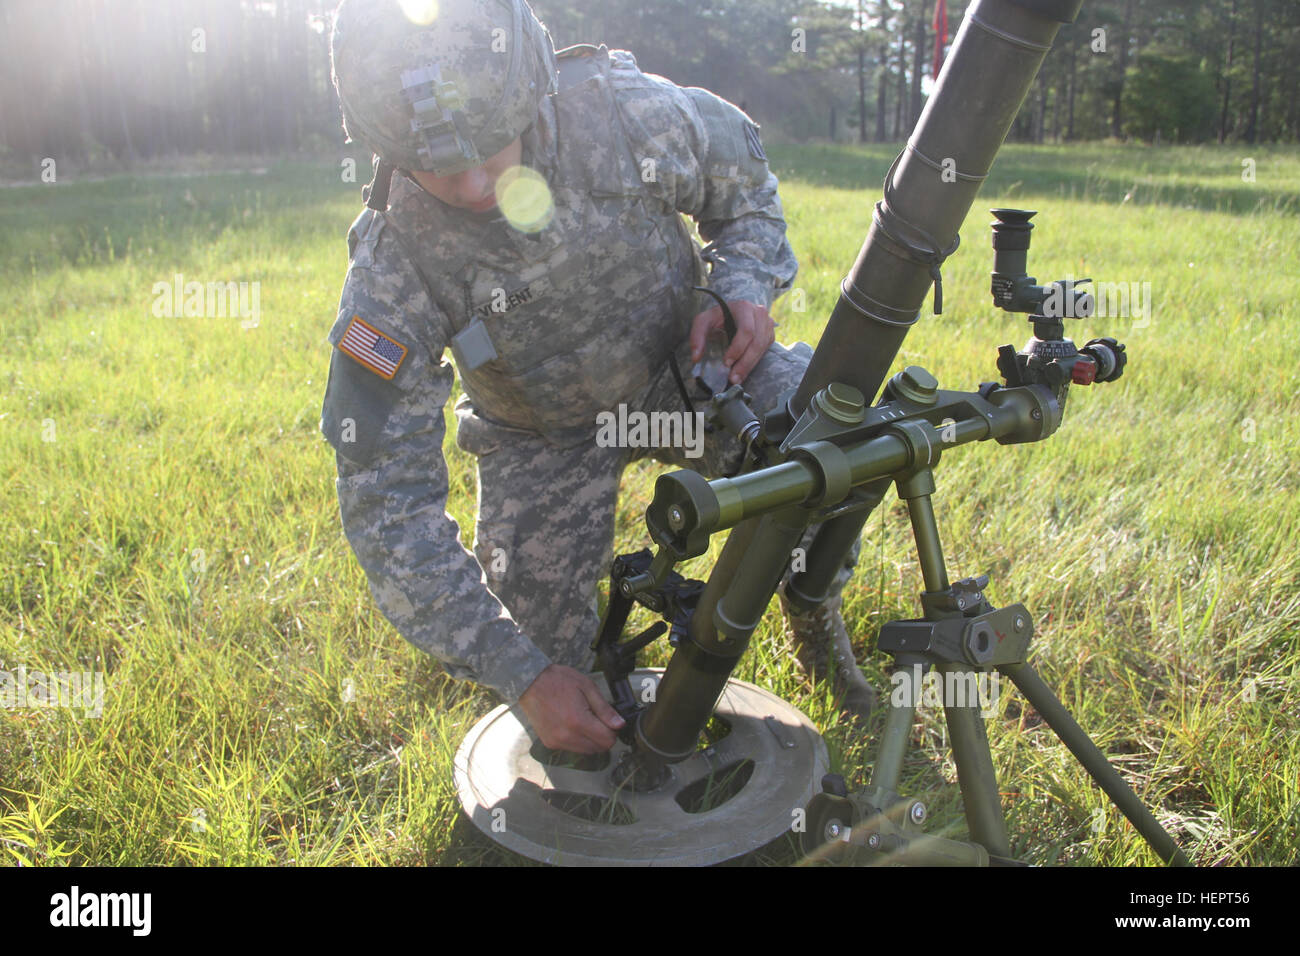 A Soldier of 6th Squadron, 8th Cavalry Regiment, 2nd Infantry Brigade Combat Team, 3rd Infantry Division prepares an M224 60mm mortar at Fort Stewart, Ga., May 10, 2016. Soldiers of 6-8 Cav. provided support by fire to artillery observers for 1st Battalion, 9th Field Artillery, 2nd Infantry Brigade Combat Team, 3rd Infantry Division. (U.S. Army photo by Pfc. Payton Wilson/Released) 6-8 Cav support by fire 160510-A-UM828-007 Stock Photo